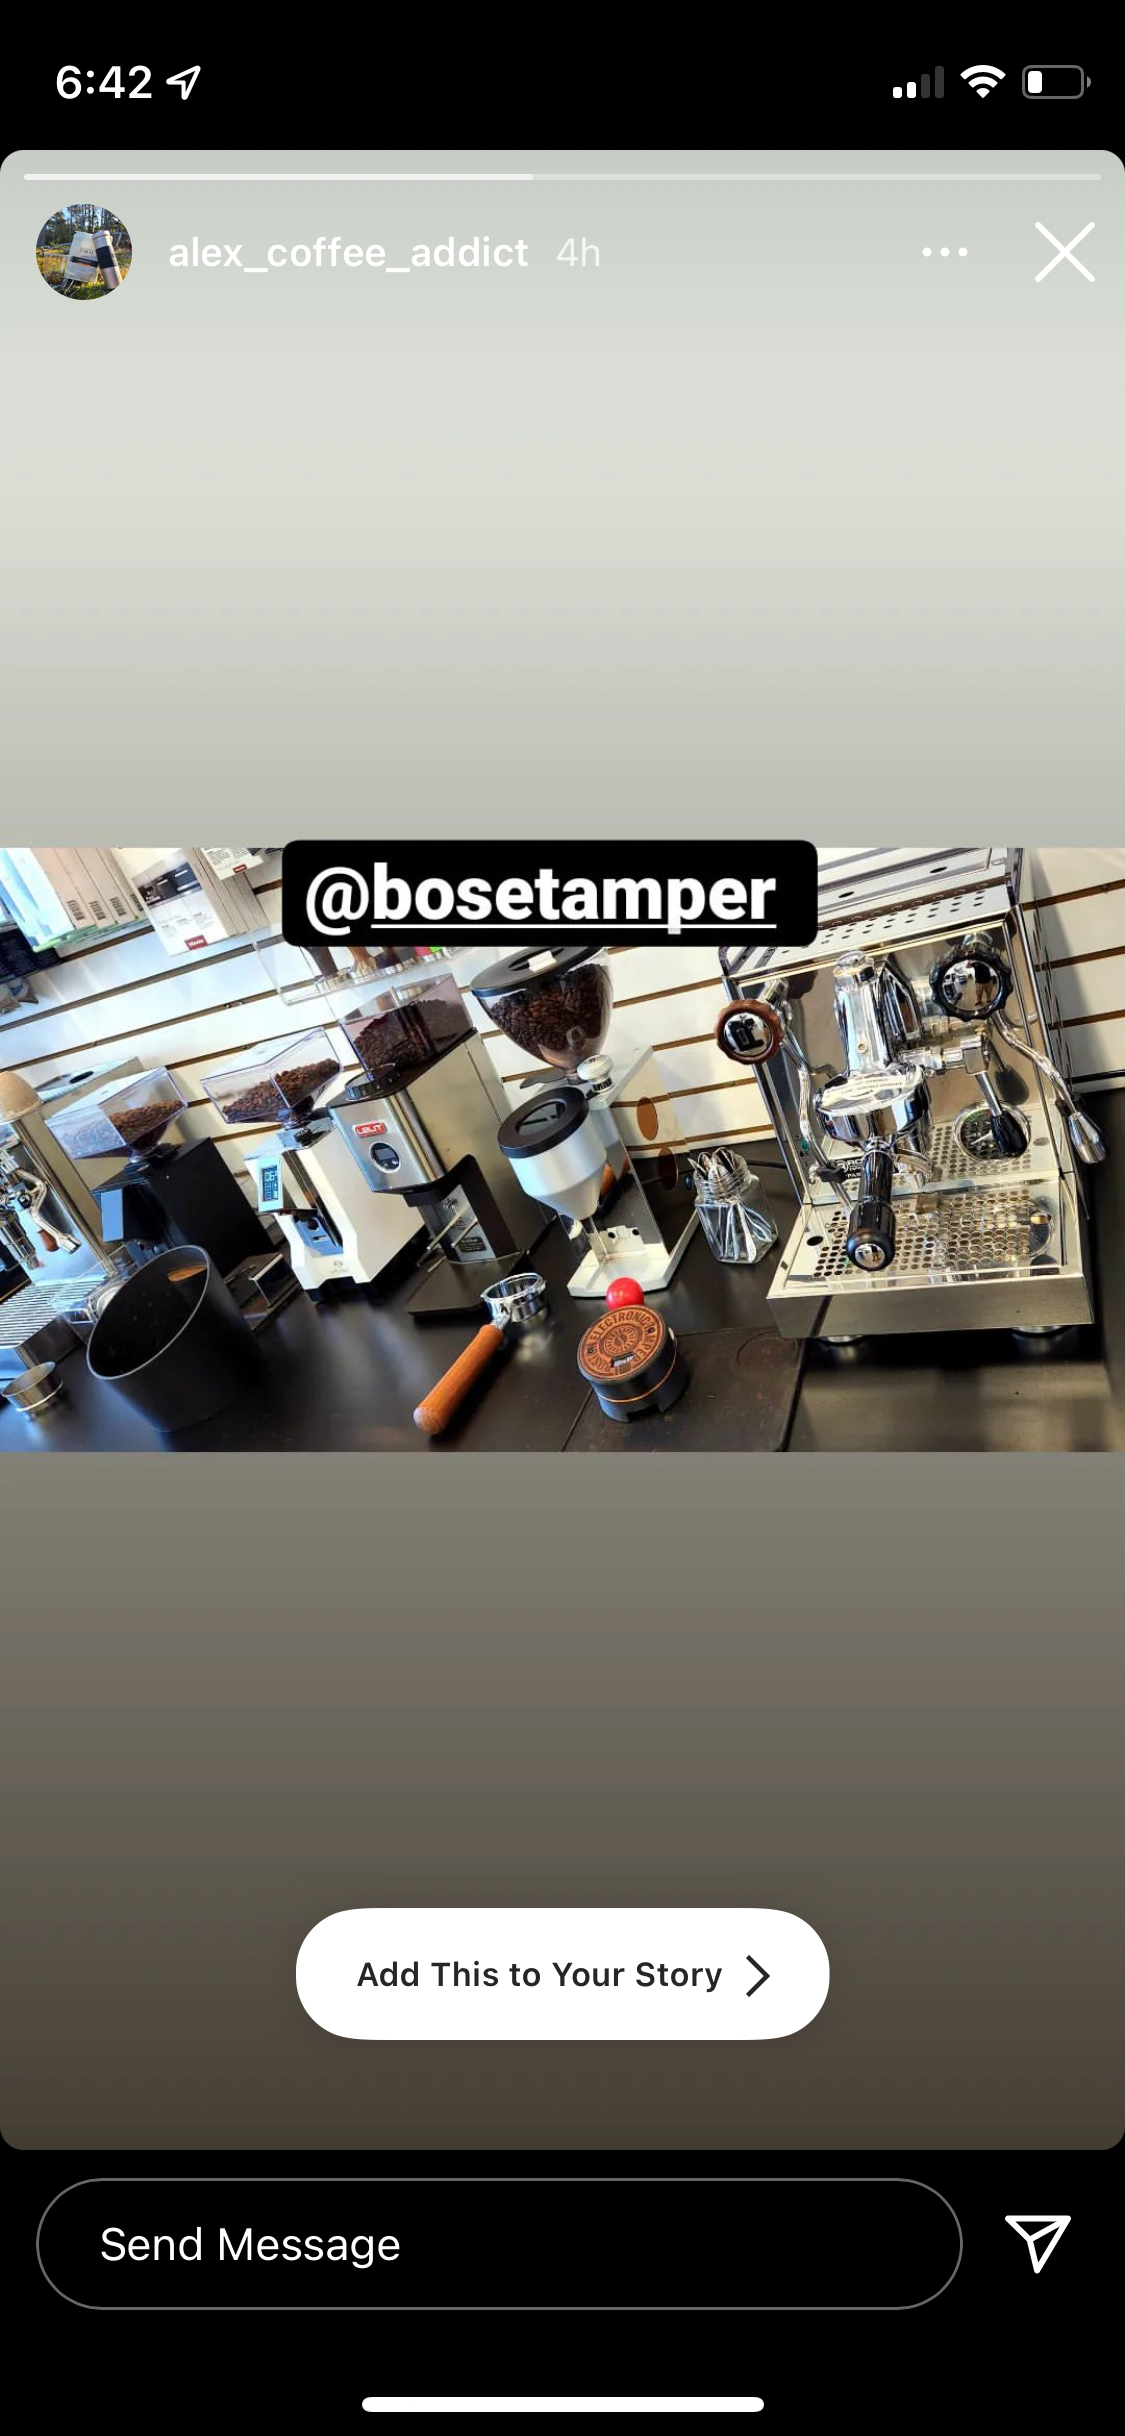 (Lead-time at least 4 weeks) BOSeTamper - Boston Electronic Espresso Tamper 58.5mm (Patent Pending). Wireless charger pad is included.